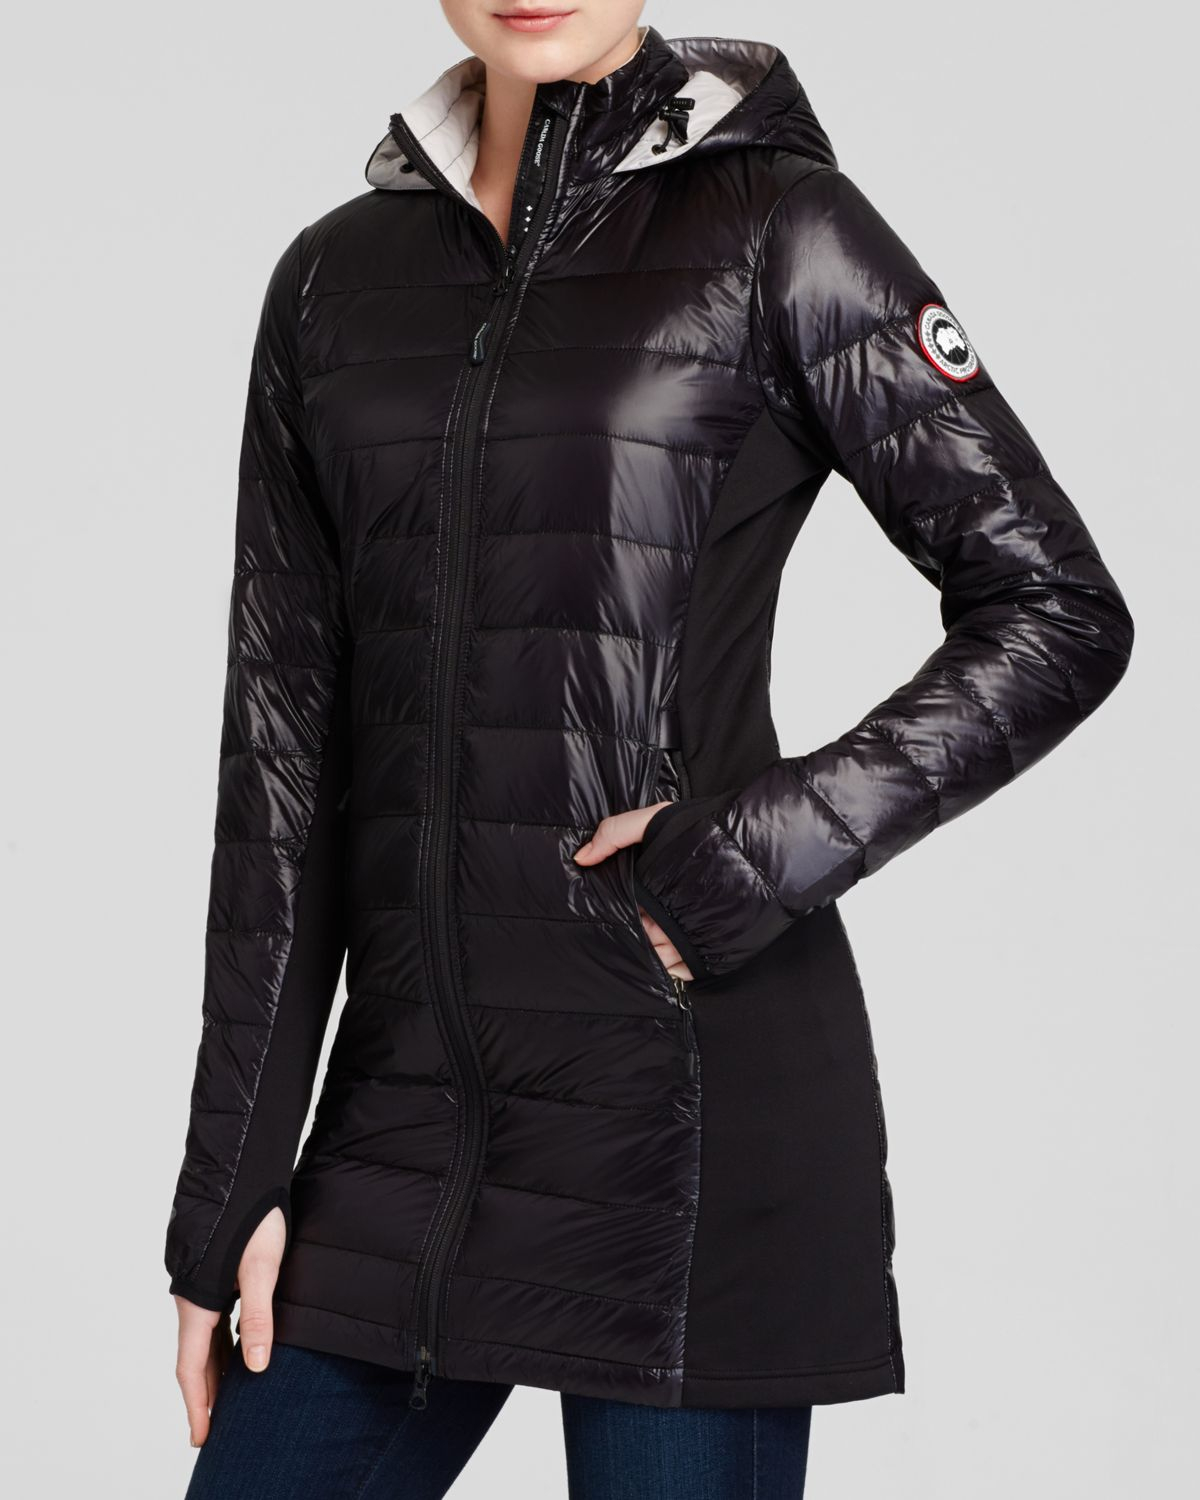 Canada Goose vest replica official - Save Up To 50% Off Canada Goose Sale To Bain Cheap On Sale